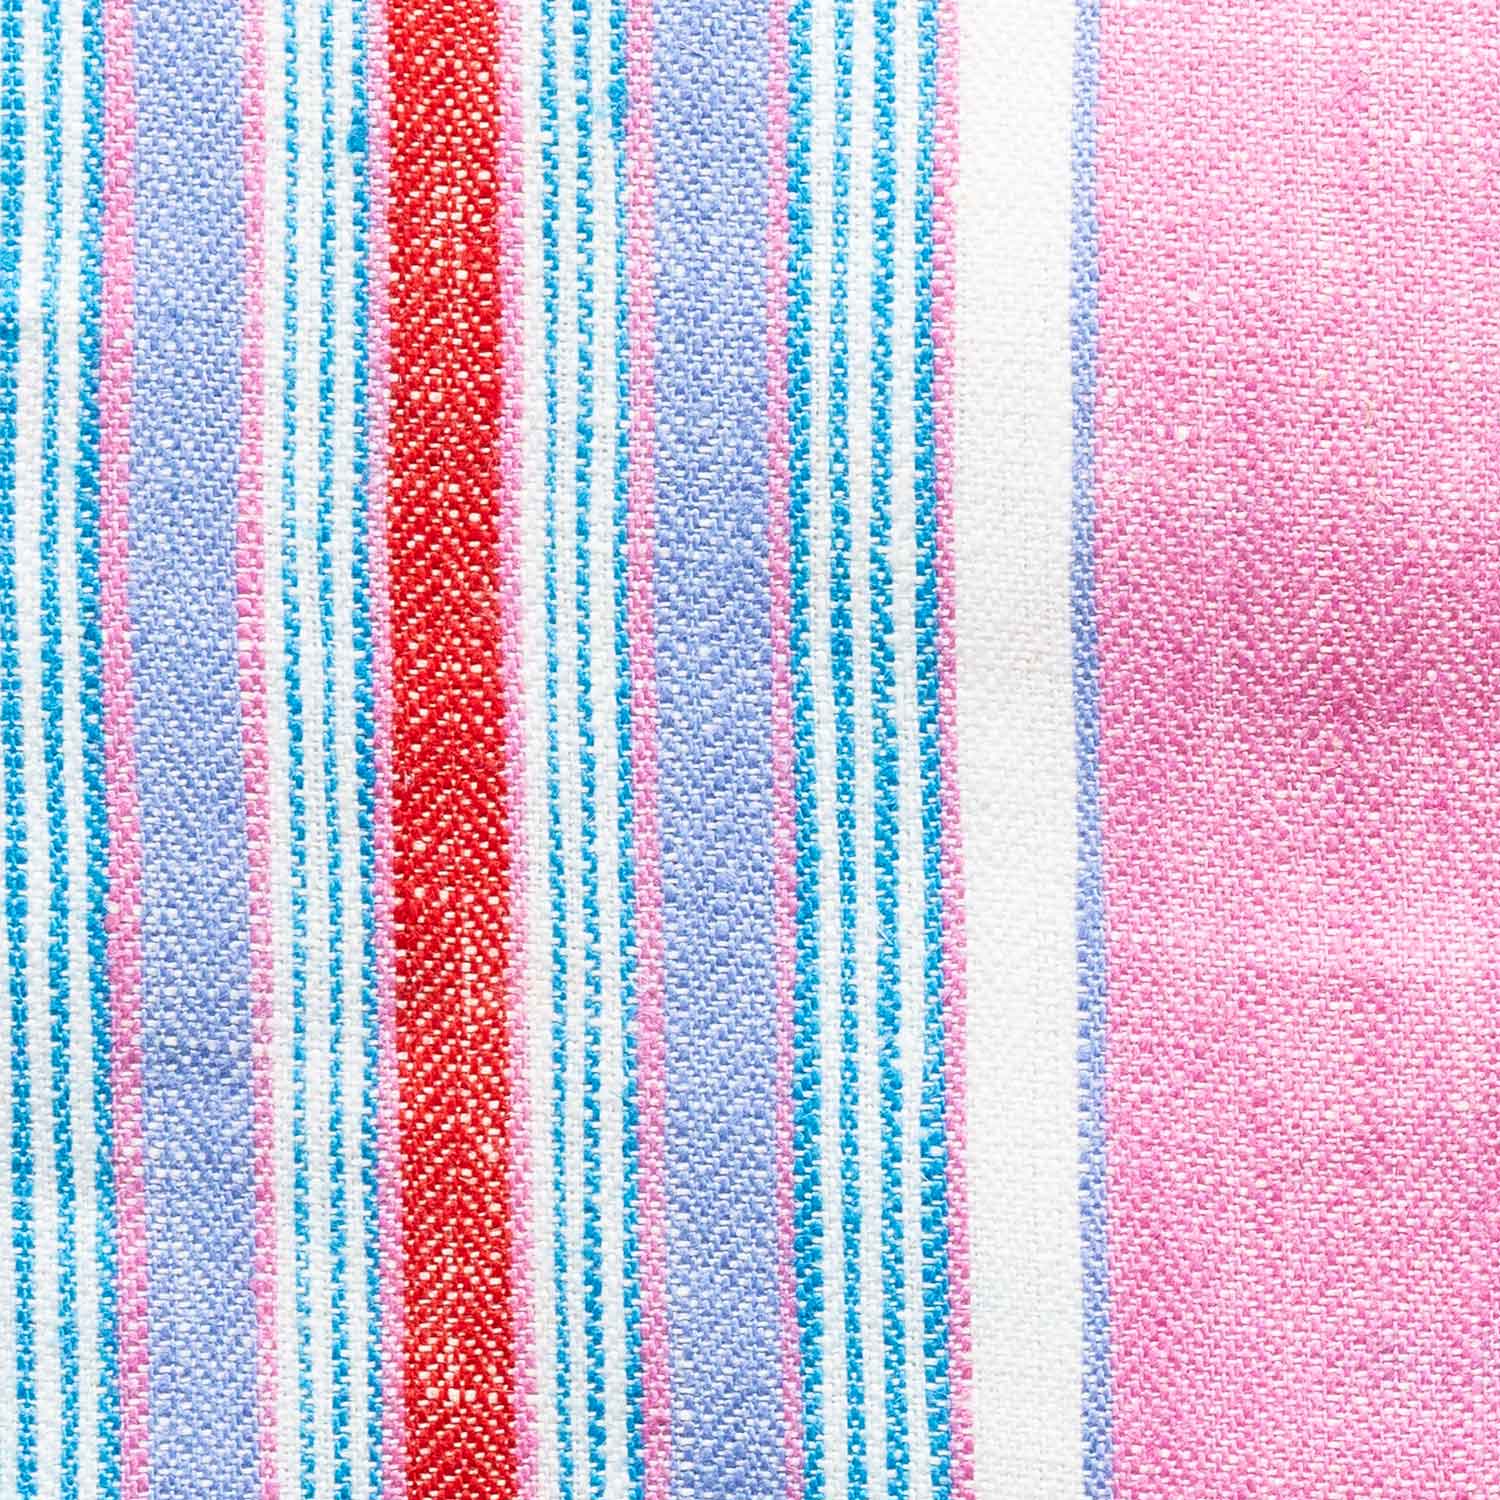 Linen Fabric Swatch, Linen Swatches, Tightly Weaved Linen, White, Blue,  Gray, Pink, Black, Striped, Chevron, 40 Choices, Ready to Ship 